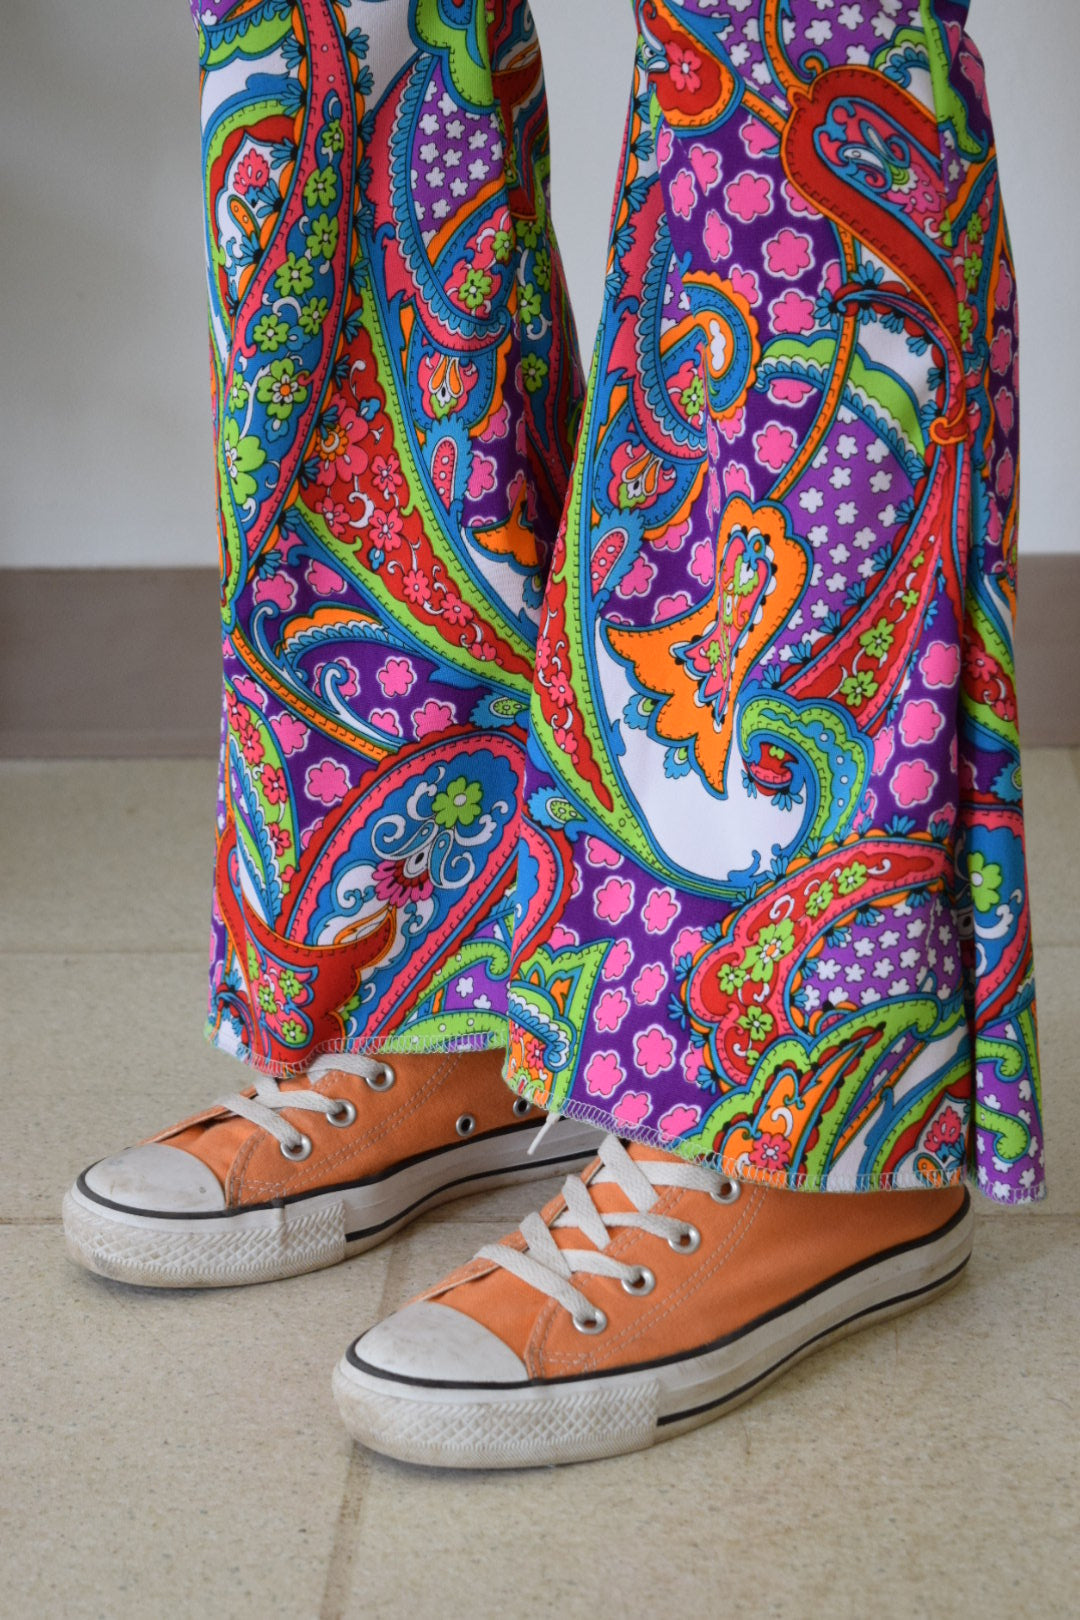 *OWLEPHANT ORIGINAL* Psychedelic Bell Bottoms - 27/28” waist